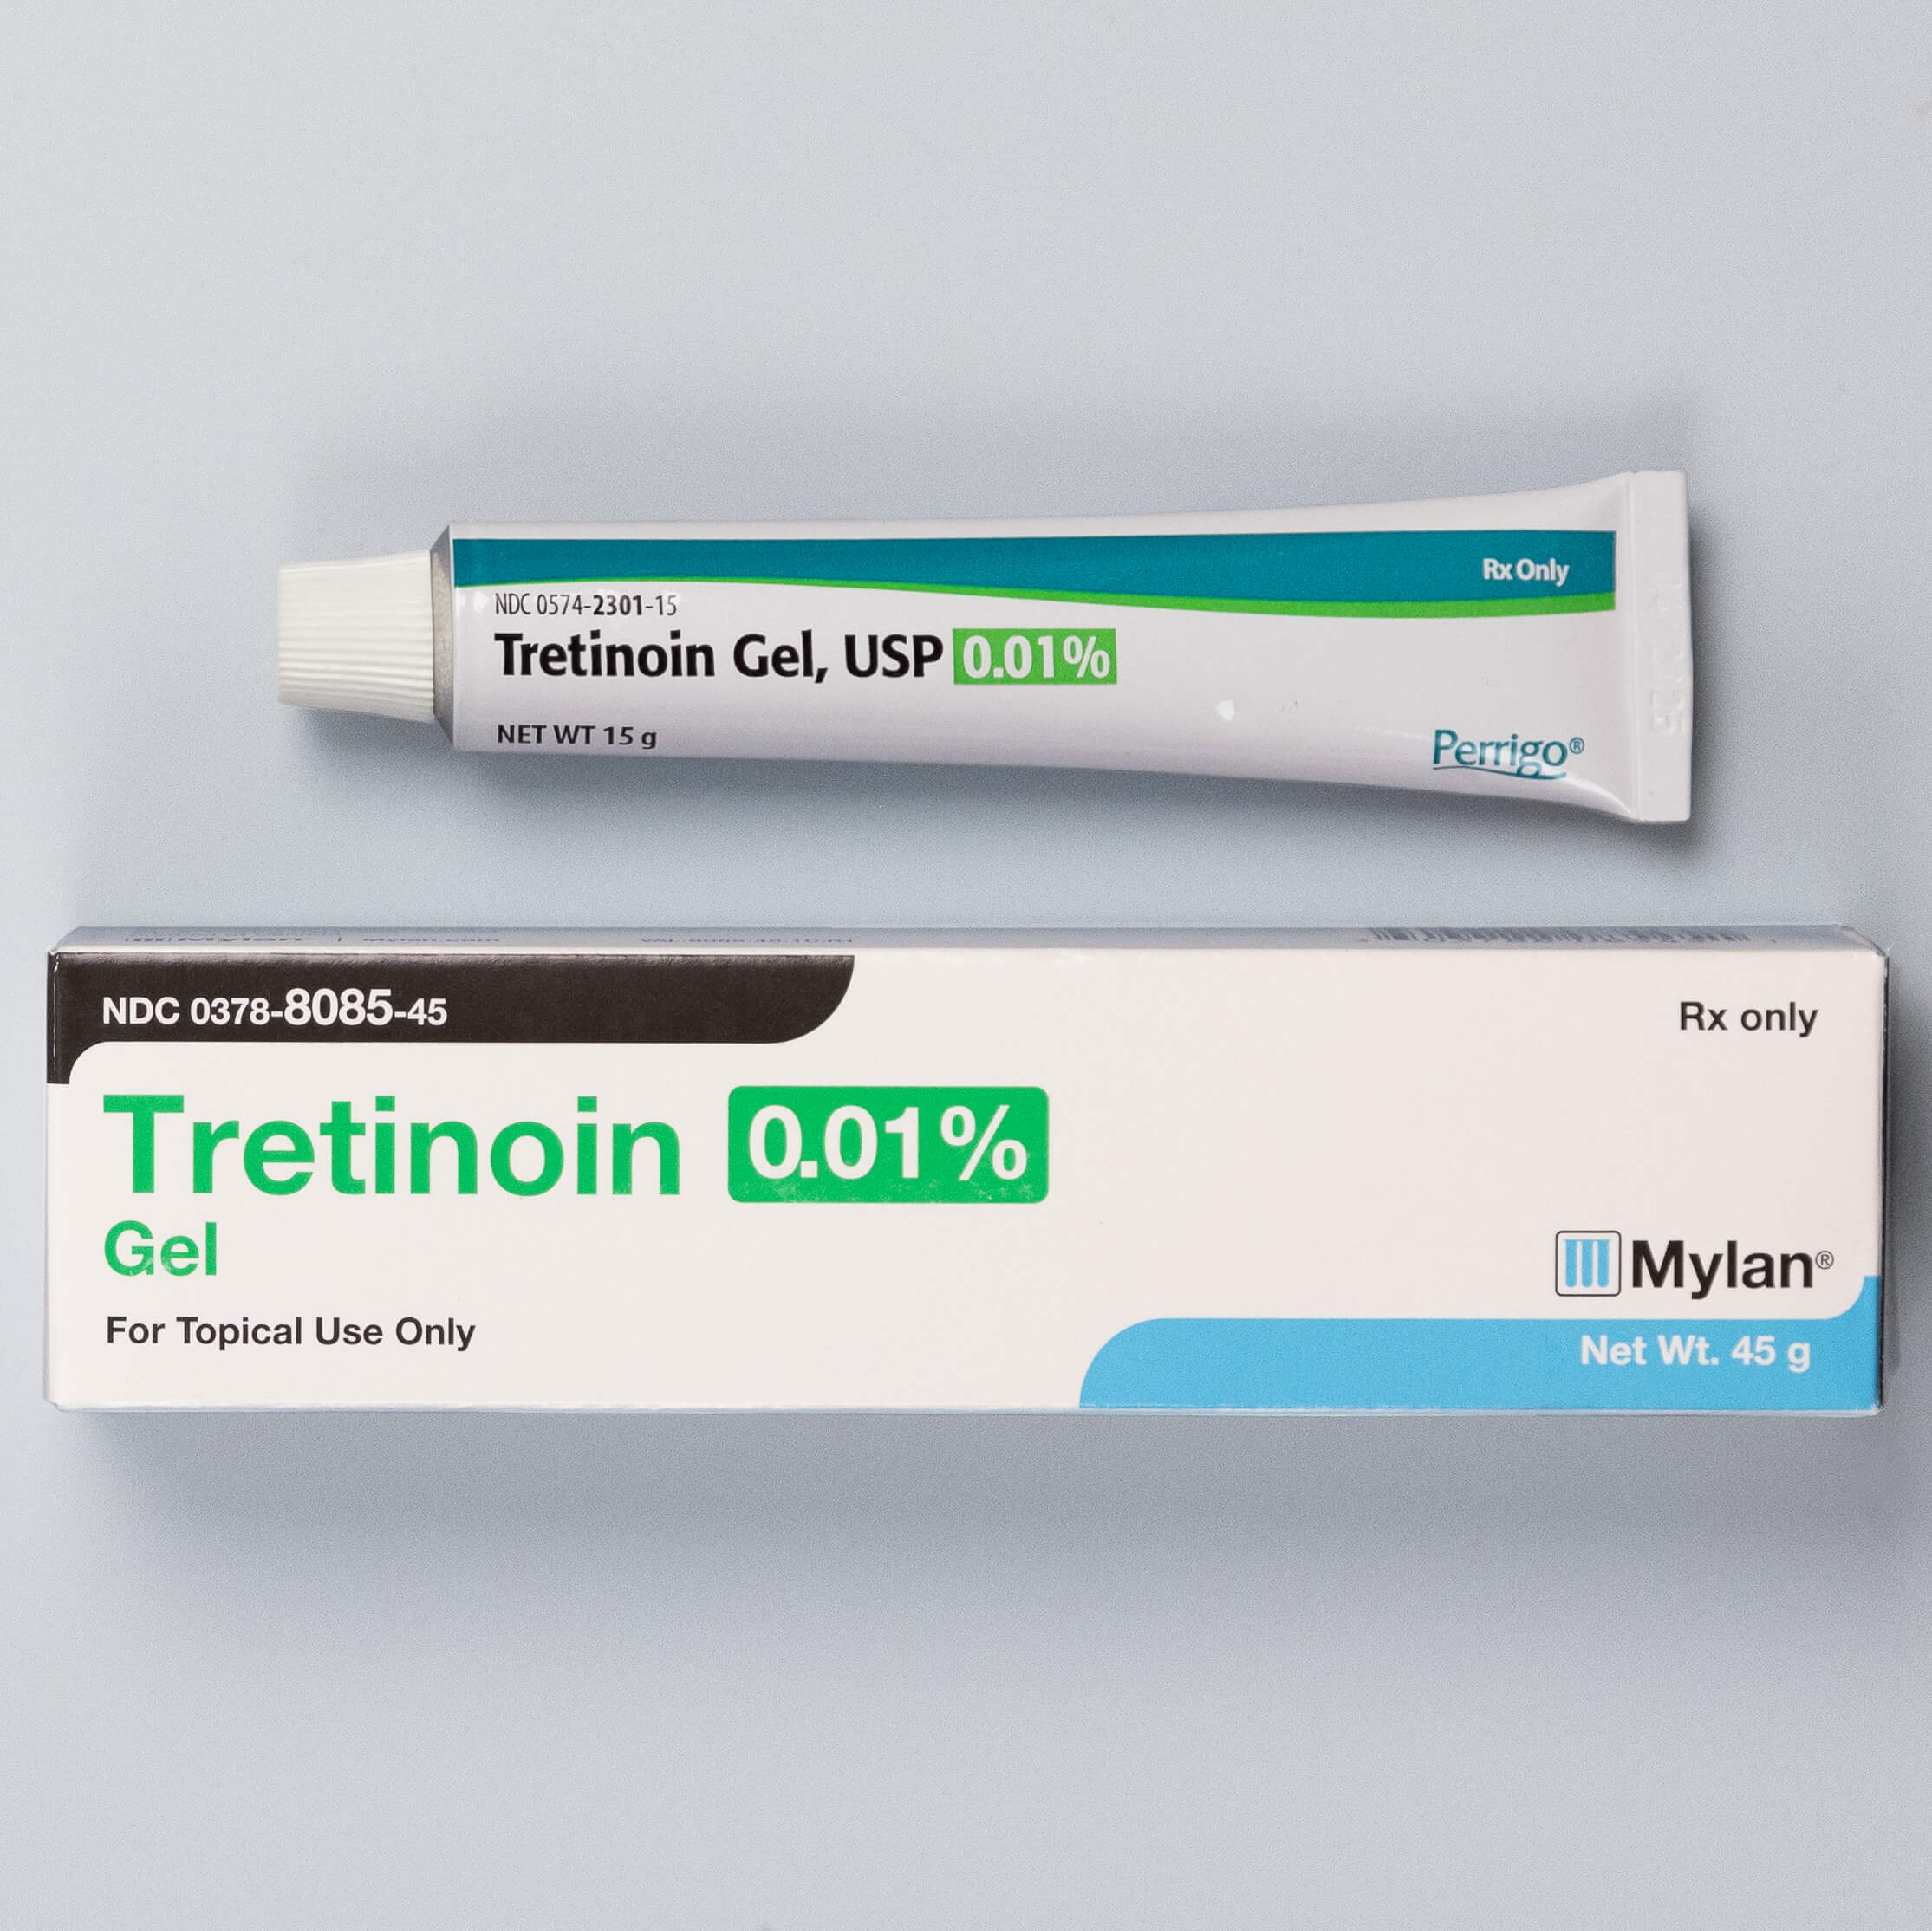 An image of tretinoin gel